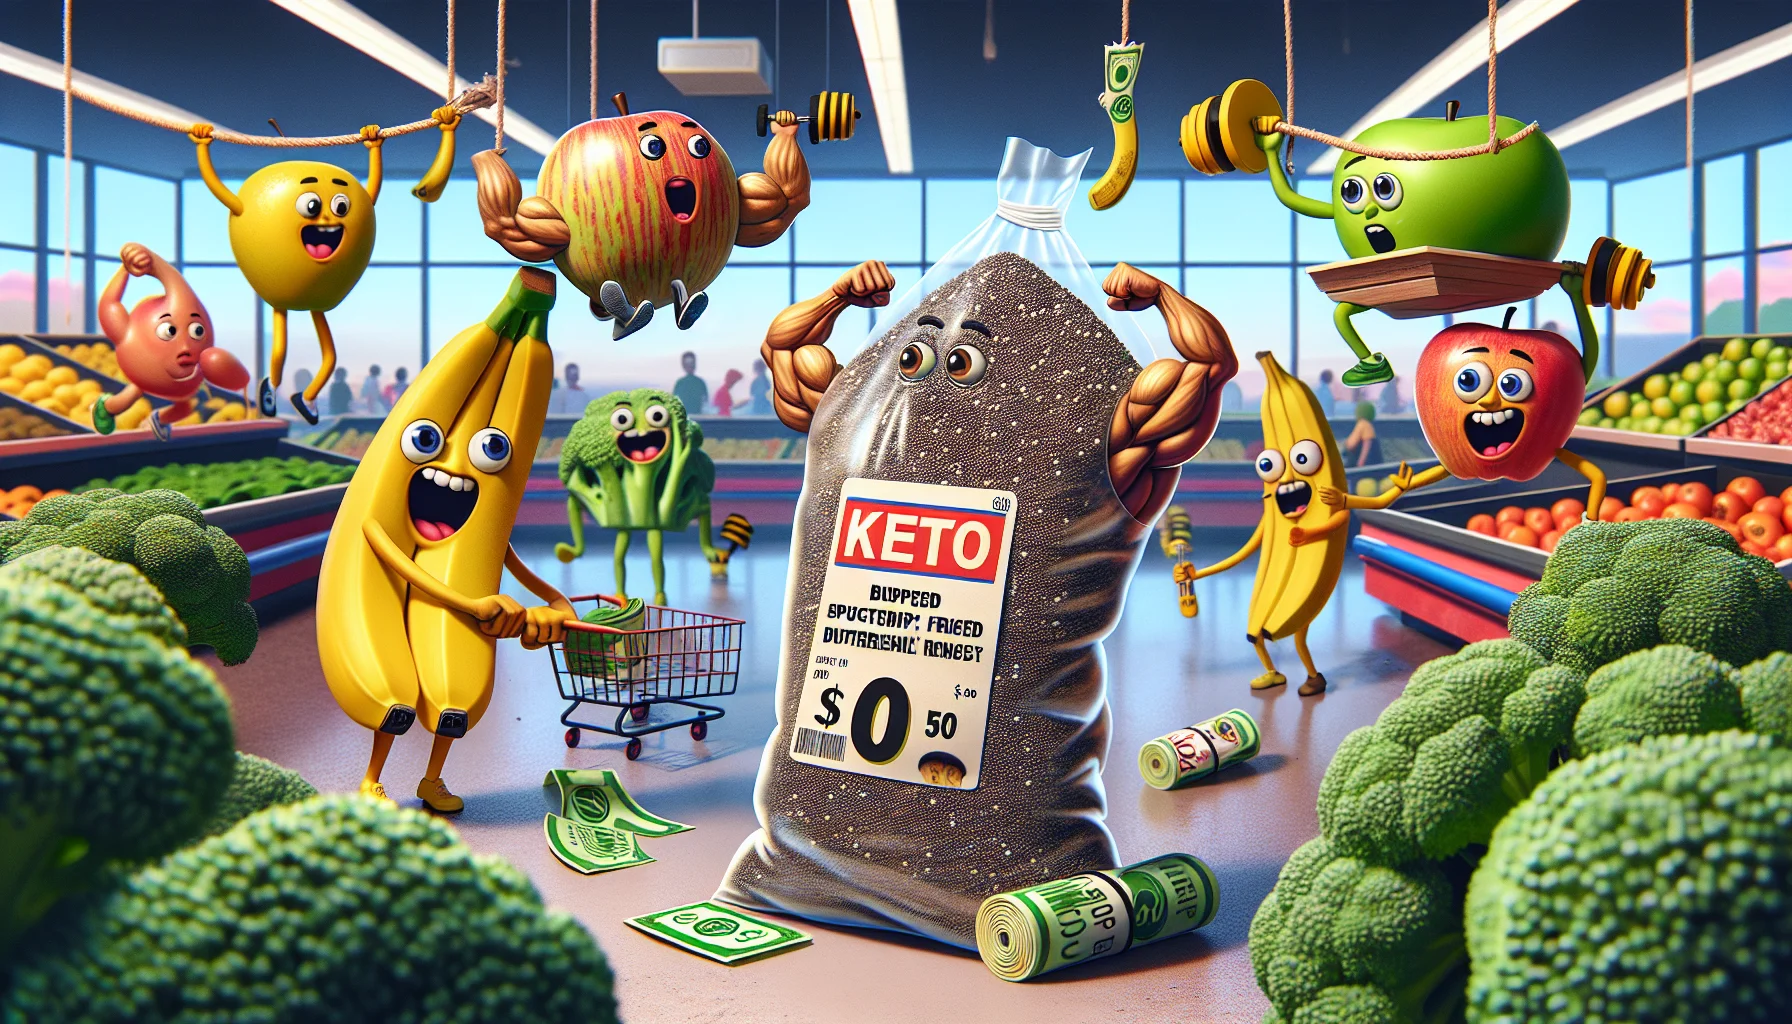 Imagine a humorous scene set in a cartoon-style supermarket. In the forefront, a bag of chia seeds is marked with a banner labeled 'Keto' and an astonishingly cheap price tag. The chia seeds are anthropomorphized, depicted with joyful expressions and flexing mini muscles, indicating their nutrition-rich nature. Surrounding them are whimsical background elements: broccoli lifting discounted price tags as if they were weights, bananas doing a balancing act on a string of green dollar bills, and apples performing a comedic stand-up routine that subliminally promotes budget-friendly healthy eating. This unexpected performance draws the attention of diverse shoppers of different descents and genders who veer off their original shopping paths, chuckling, and opting for these affordable healthy items instead.